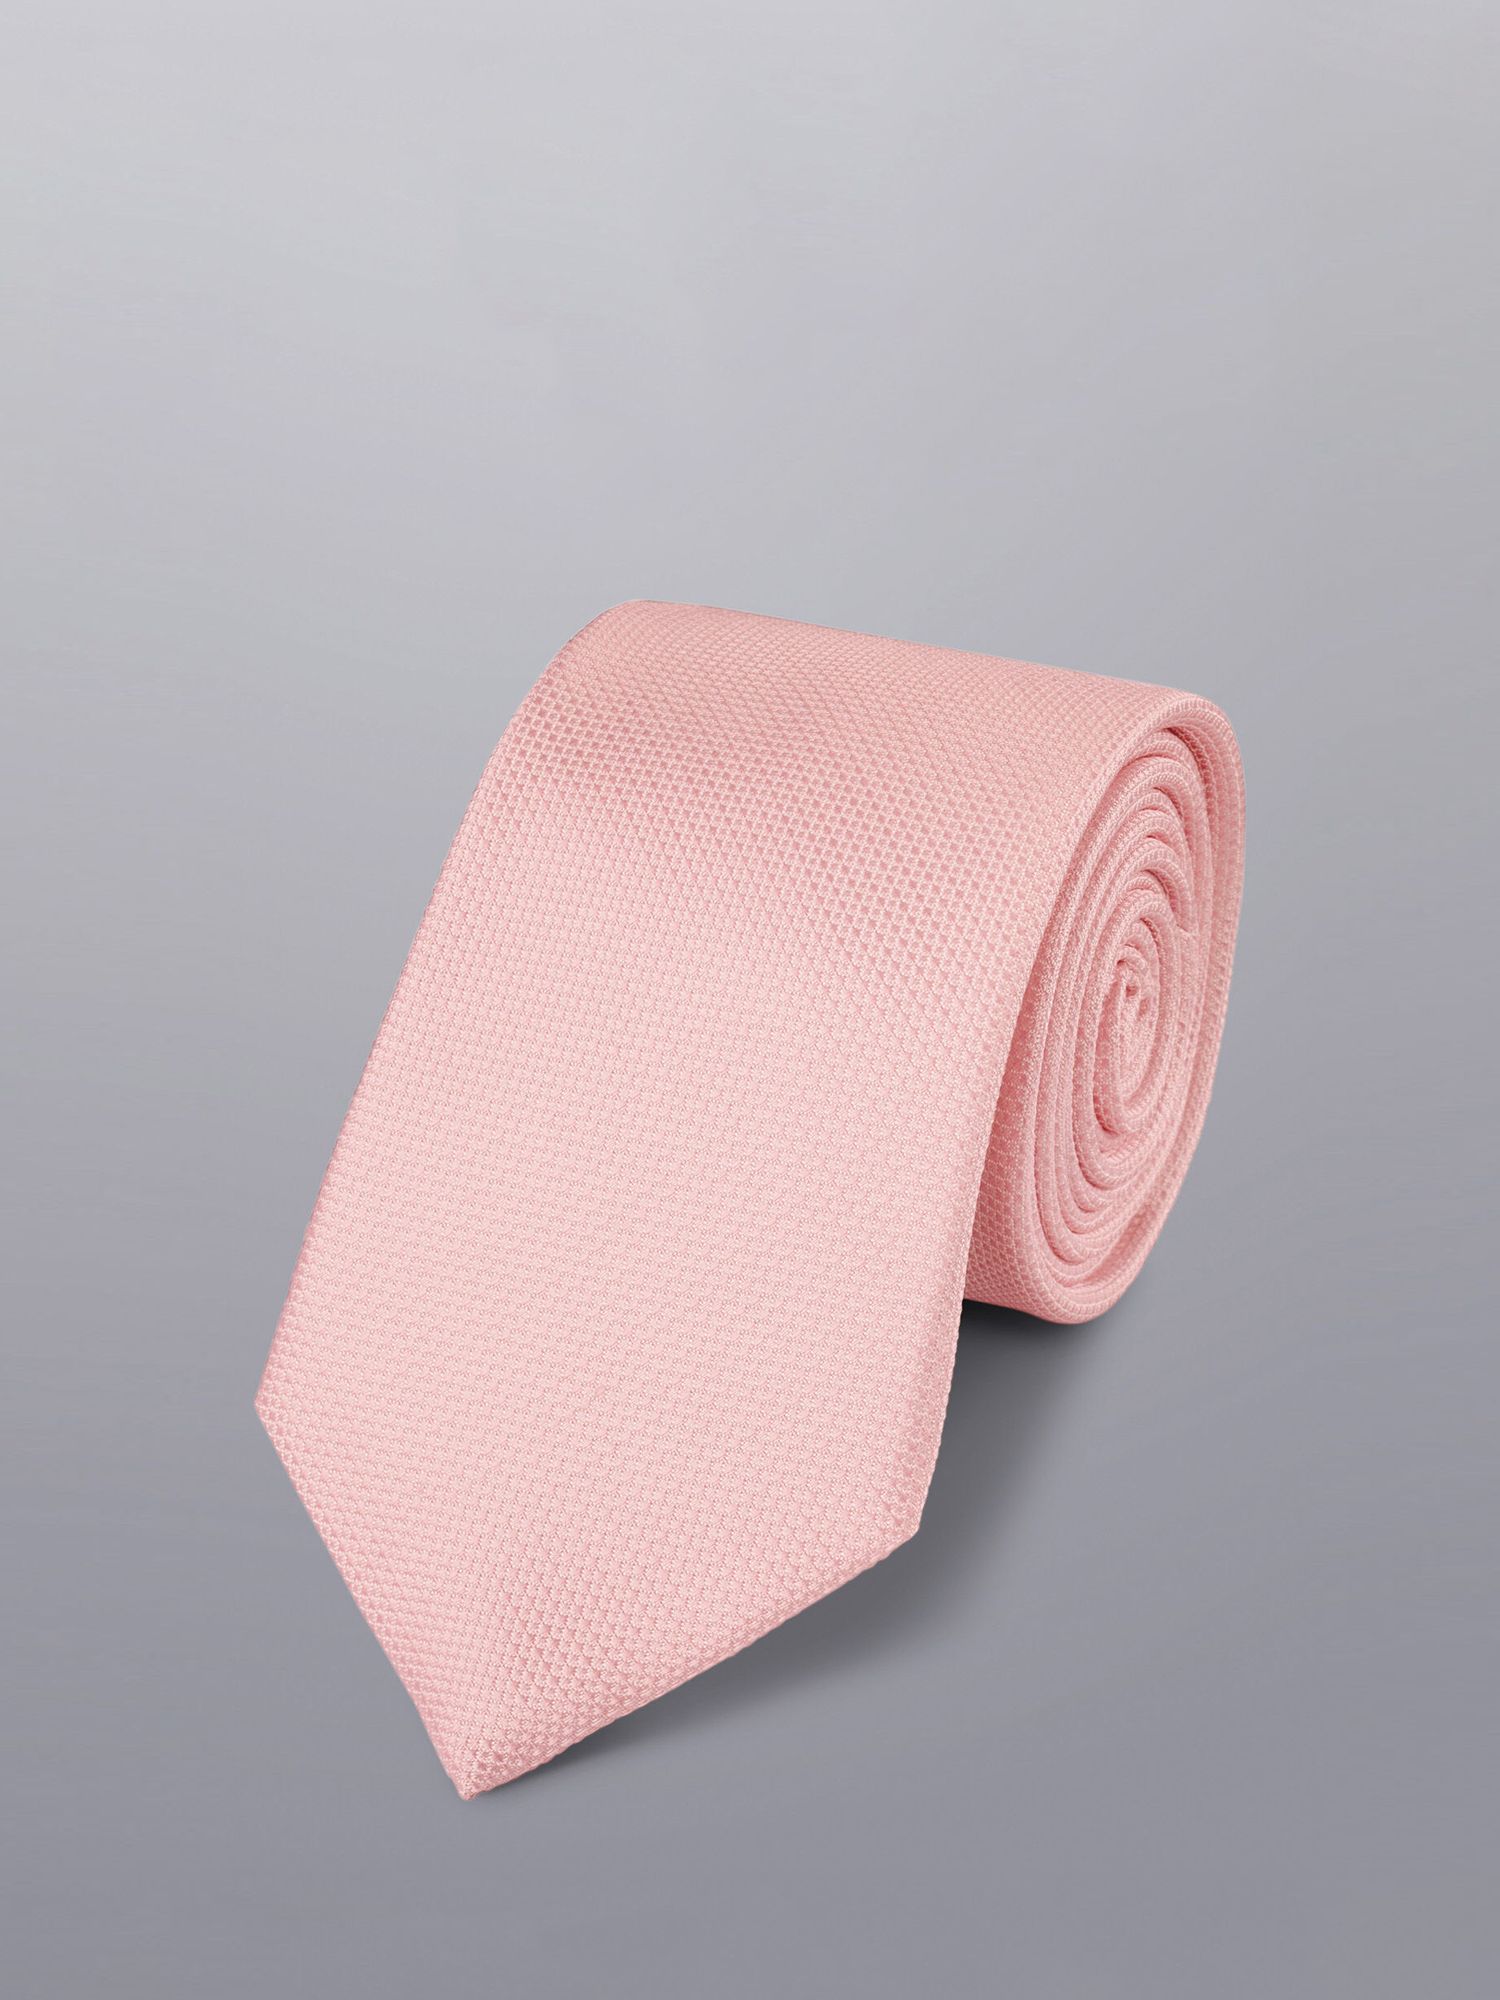 Charles Tyrwhitt Stain Resistant Silk Tie, Pink, One Size